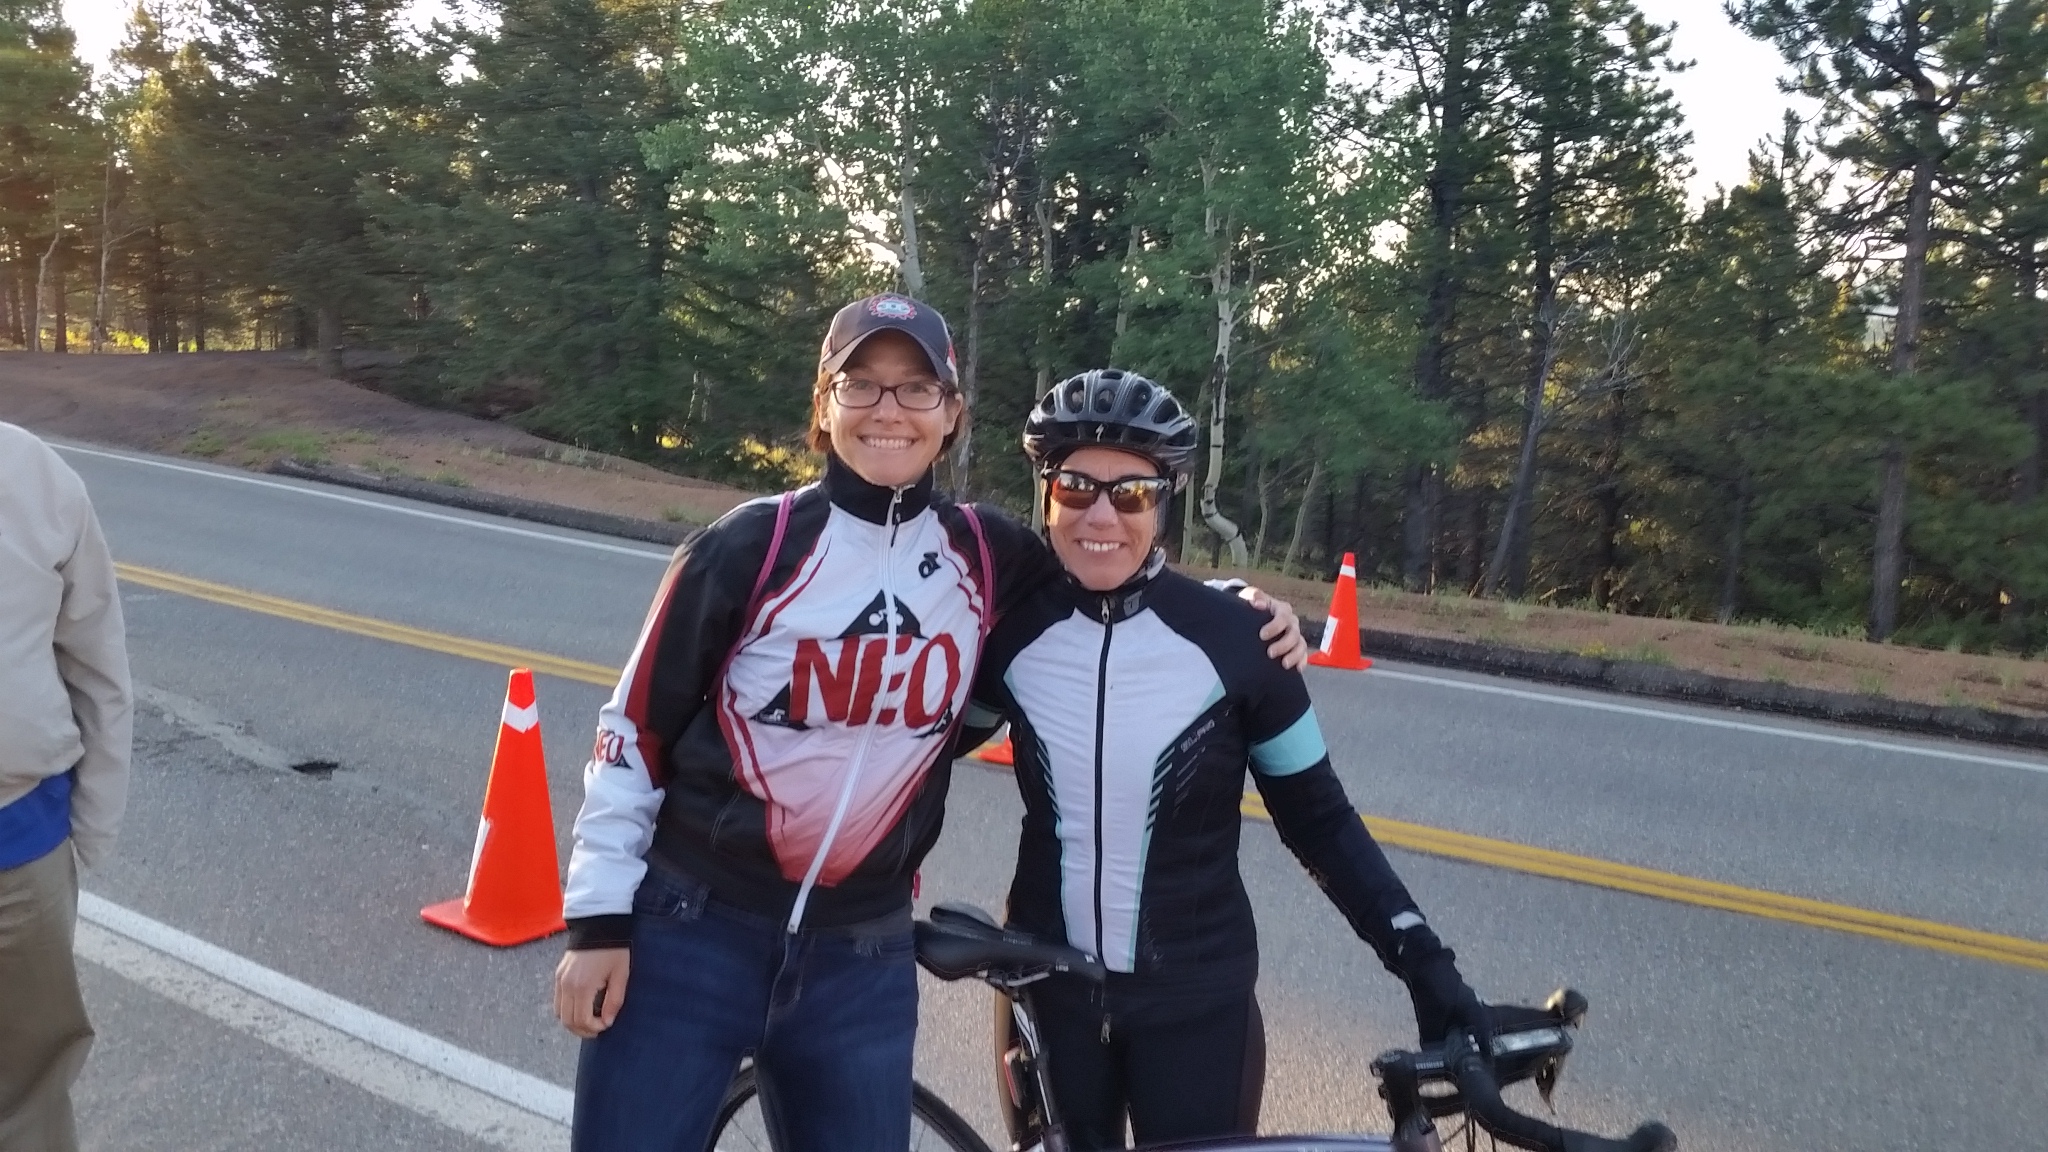 Coach Nicole with Cathleen before she competes in the 2016 Hill Climb National Championships on Pikes Peak.